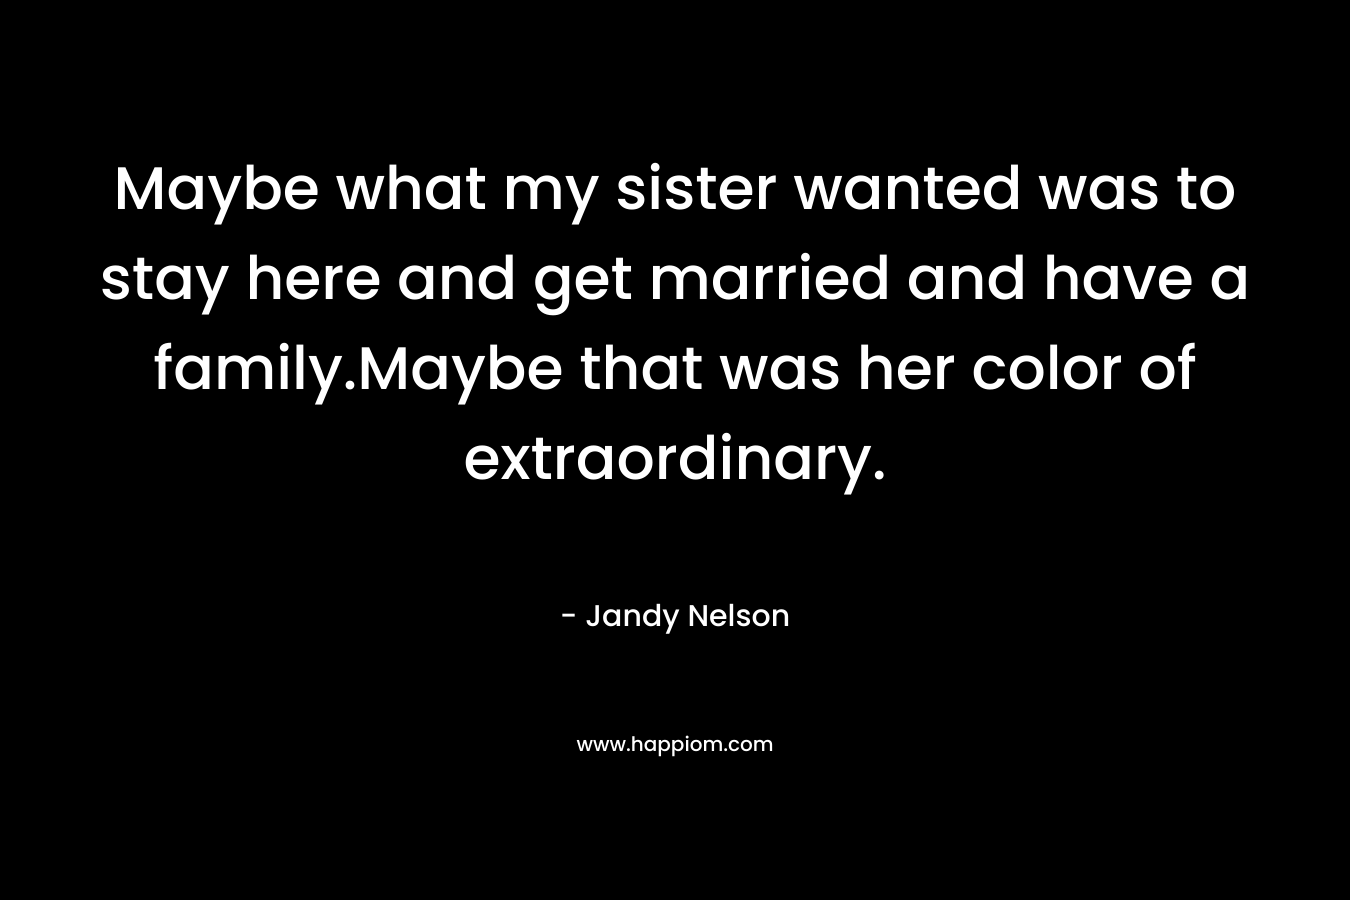 Maybe what my sister wanted was to stay here and get married and have a family.Maybe that was her color of extraordinary. – Jandy Nelson